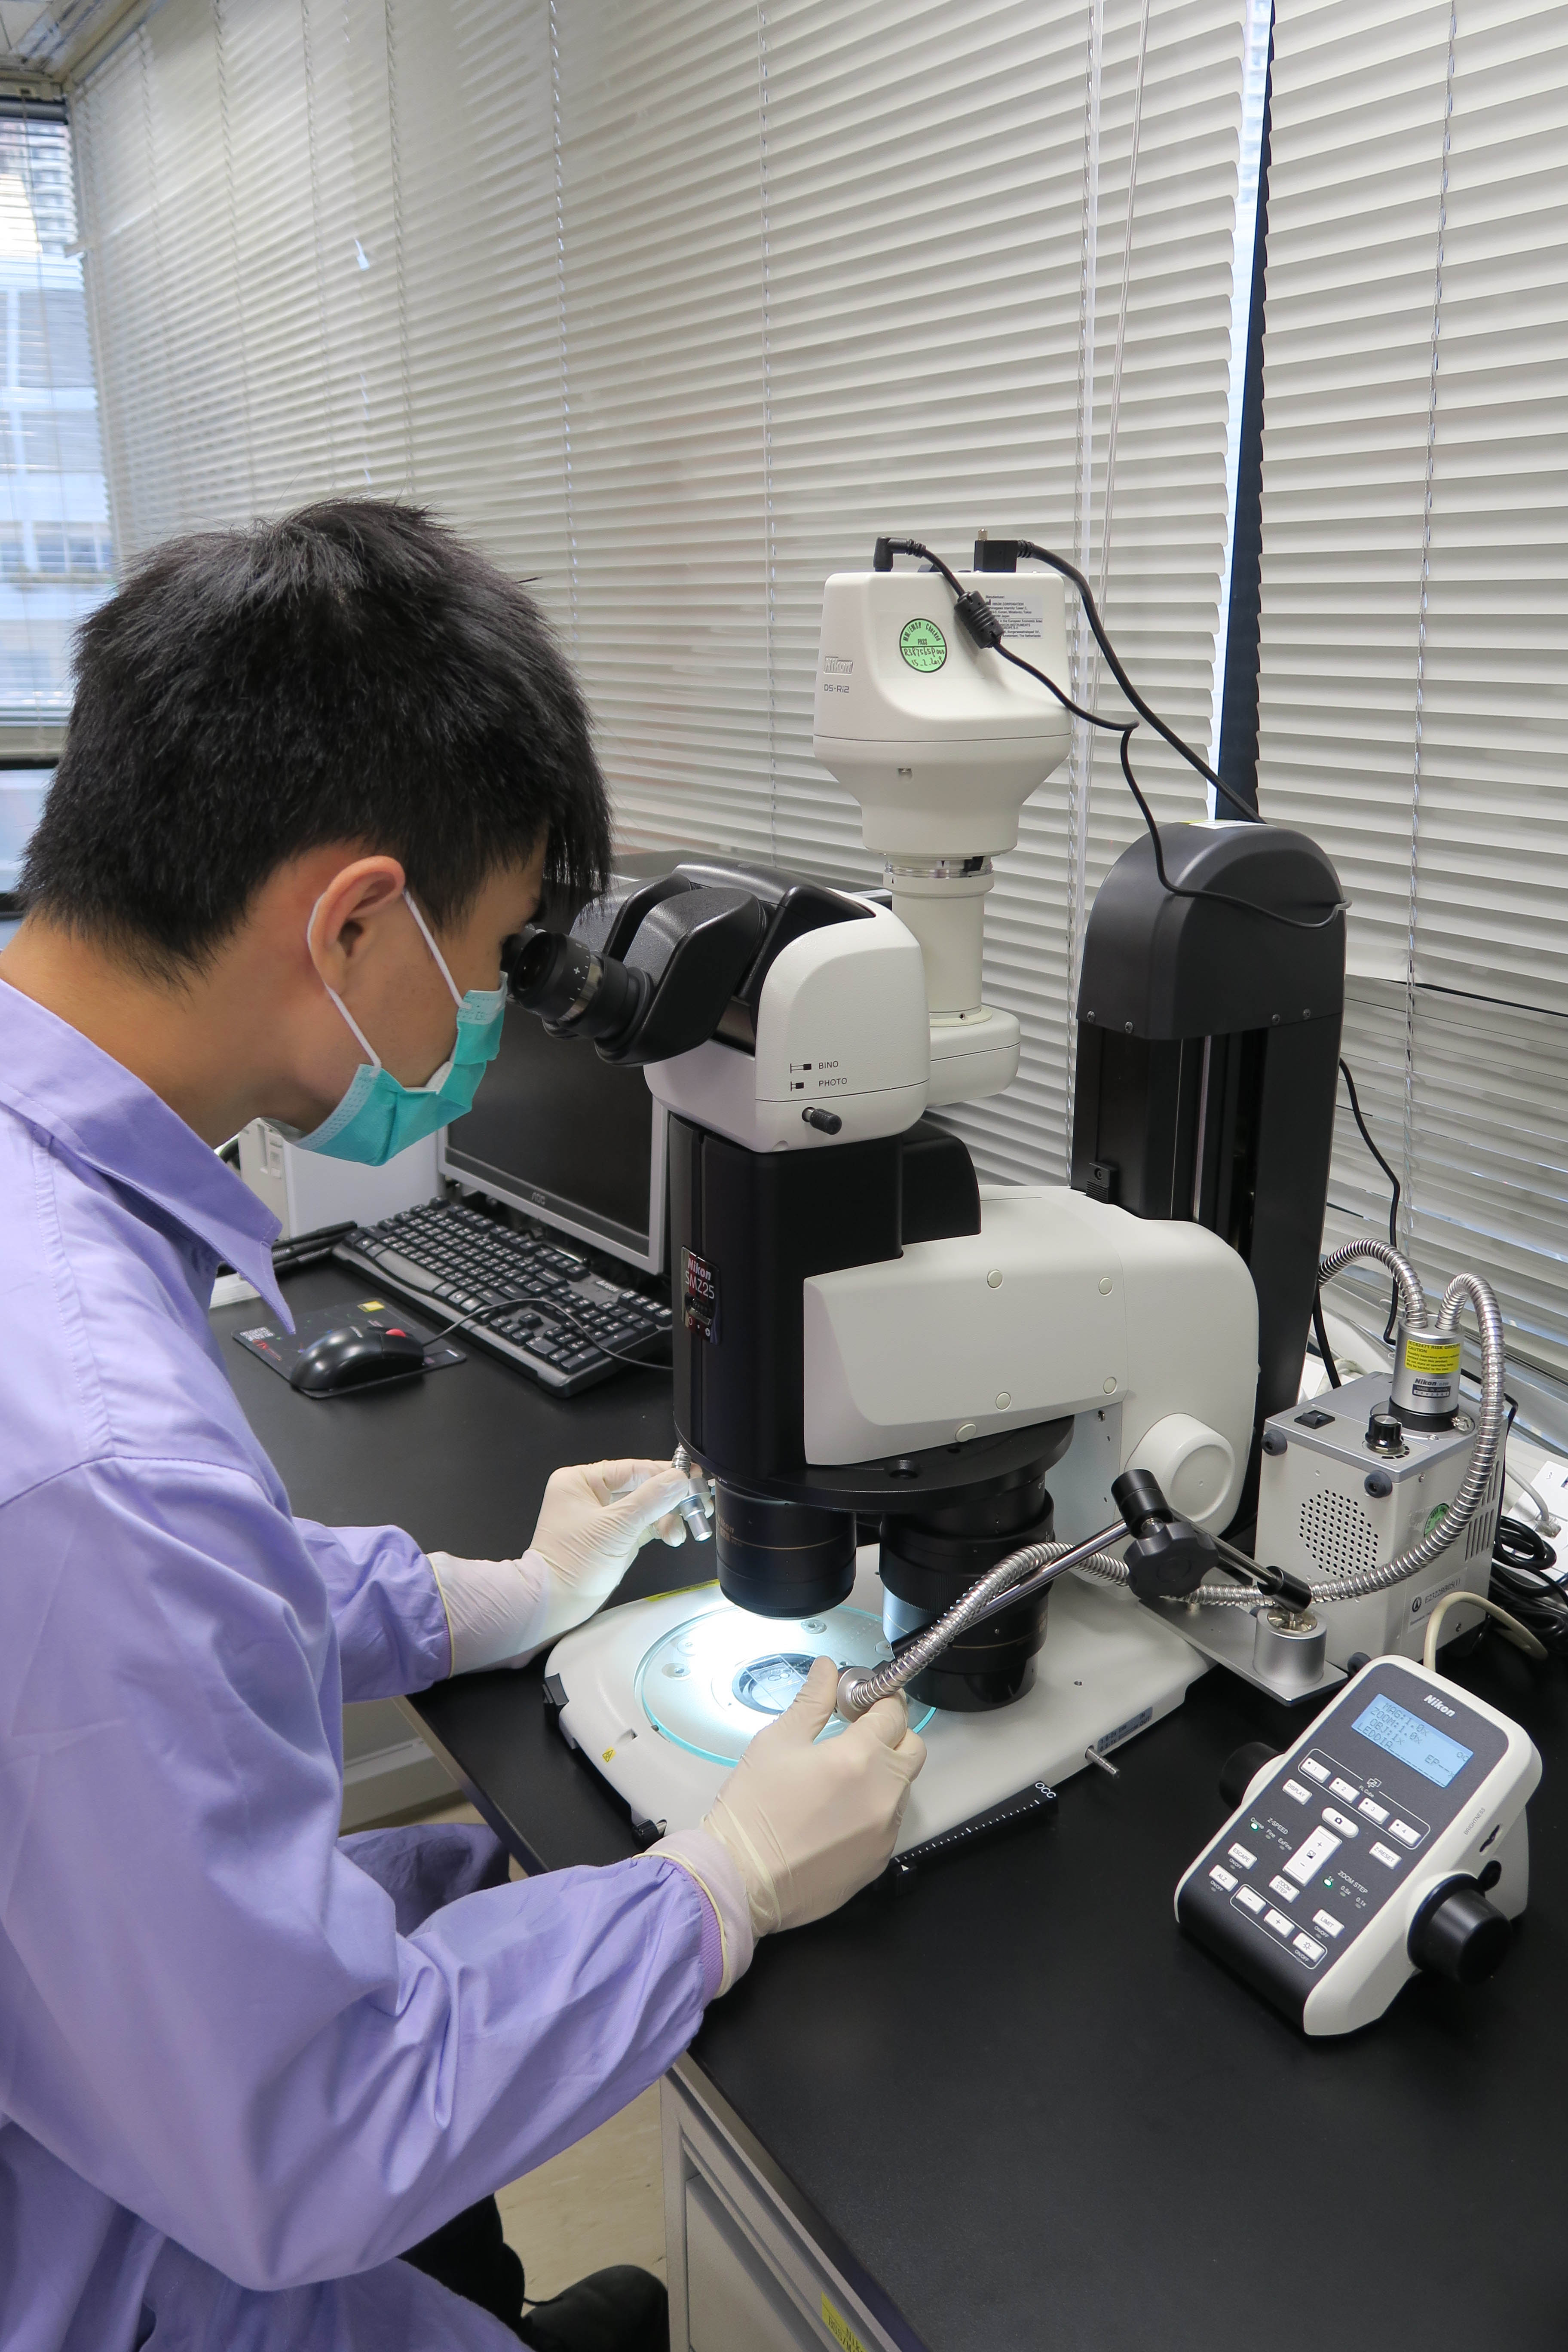 A staff is examining a biological sample under a stereomicroscope